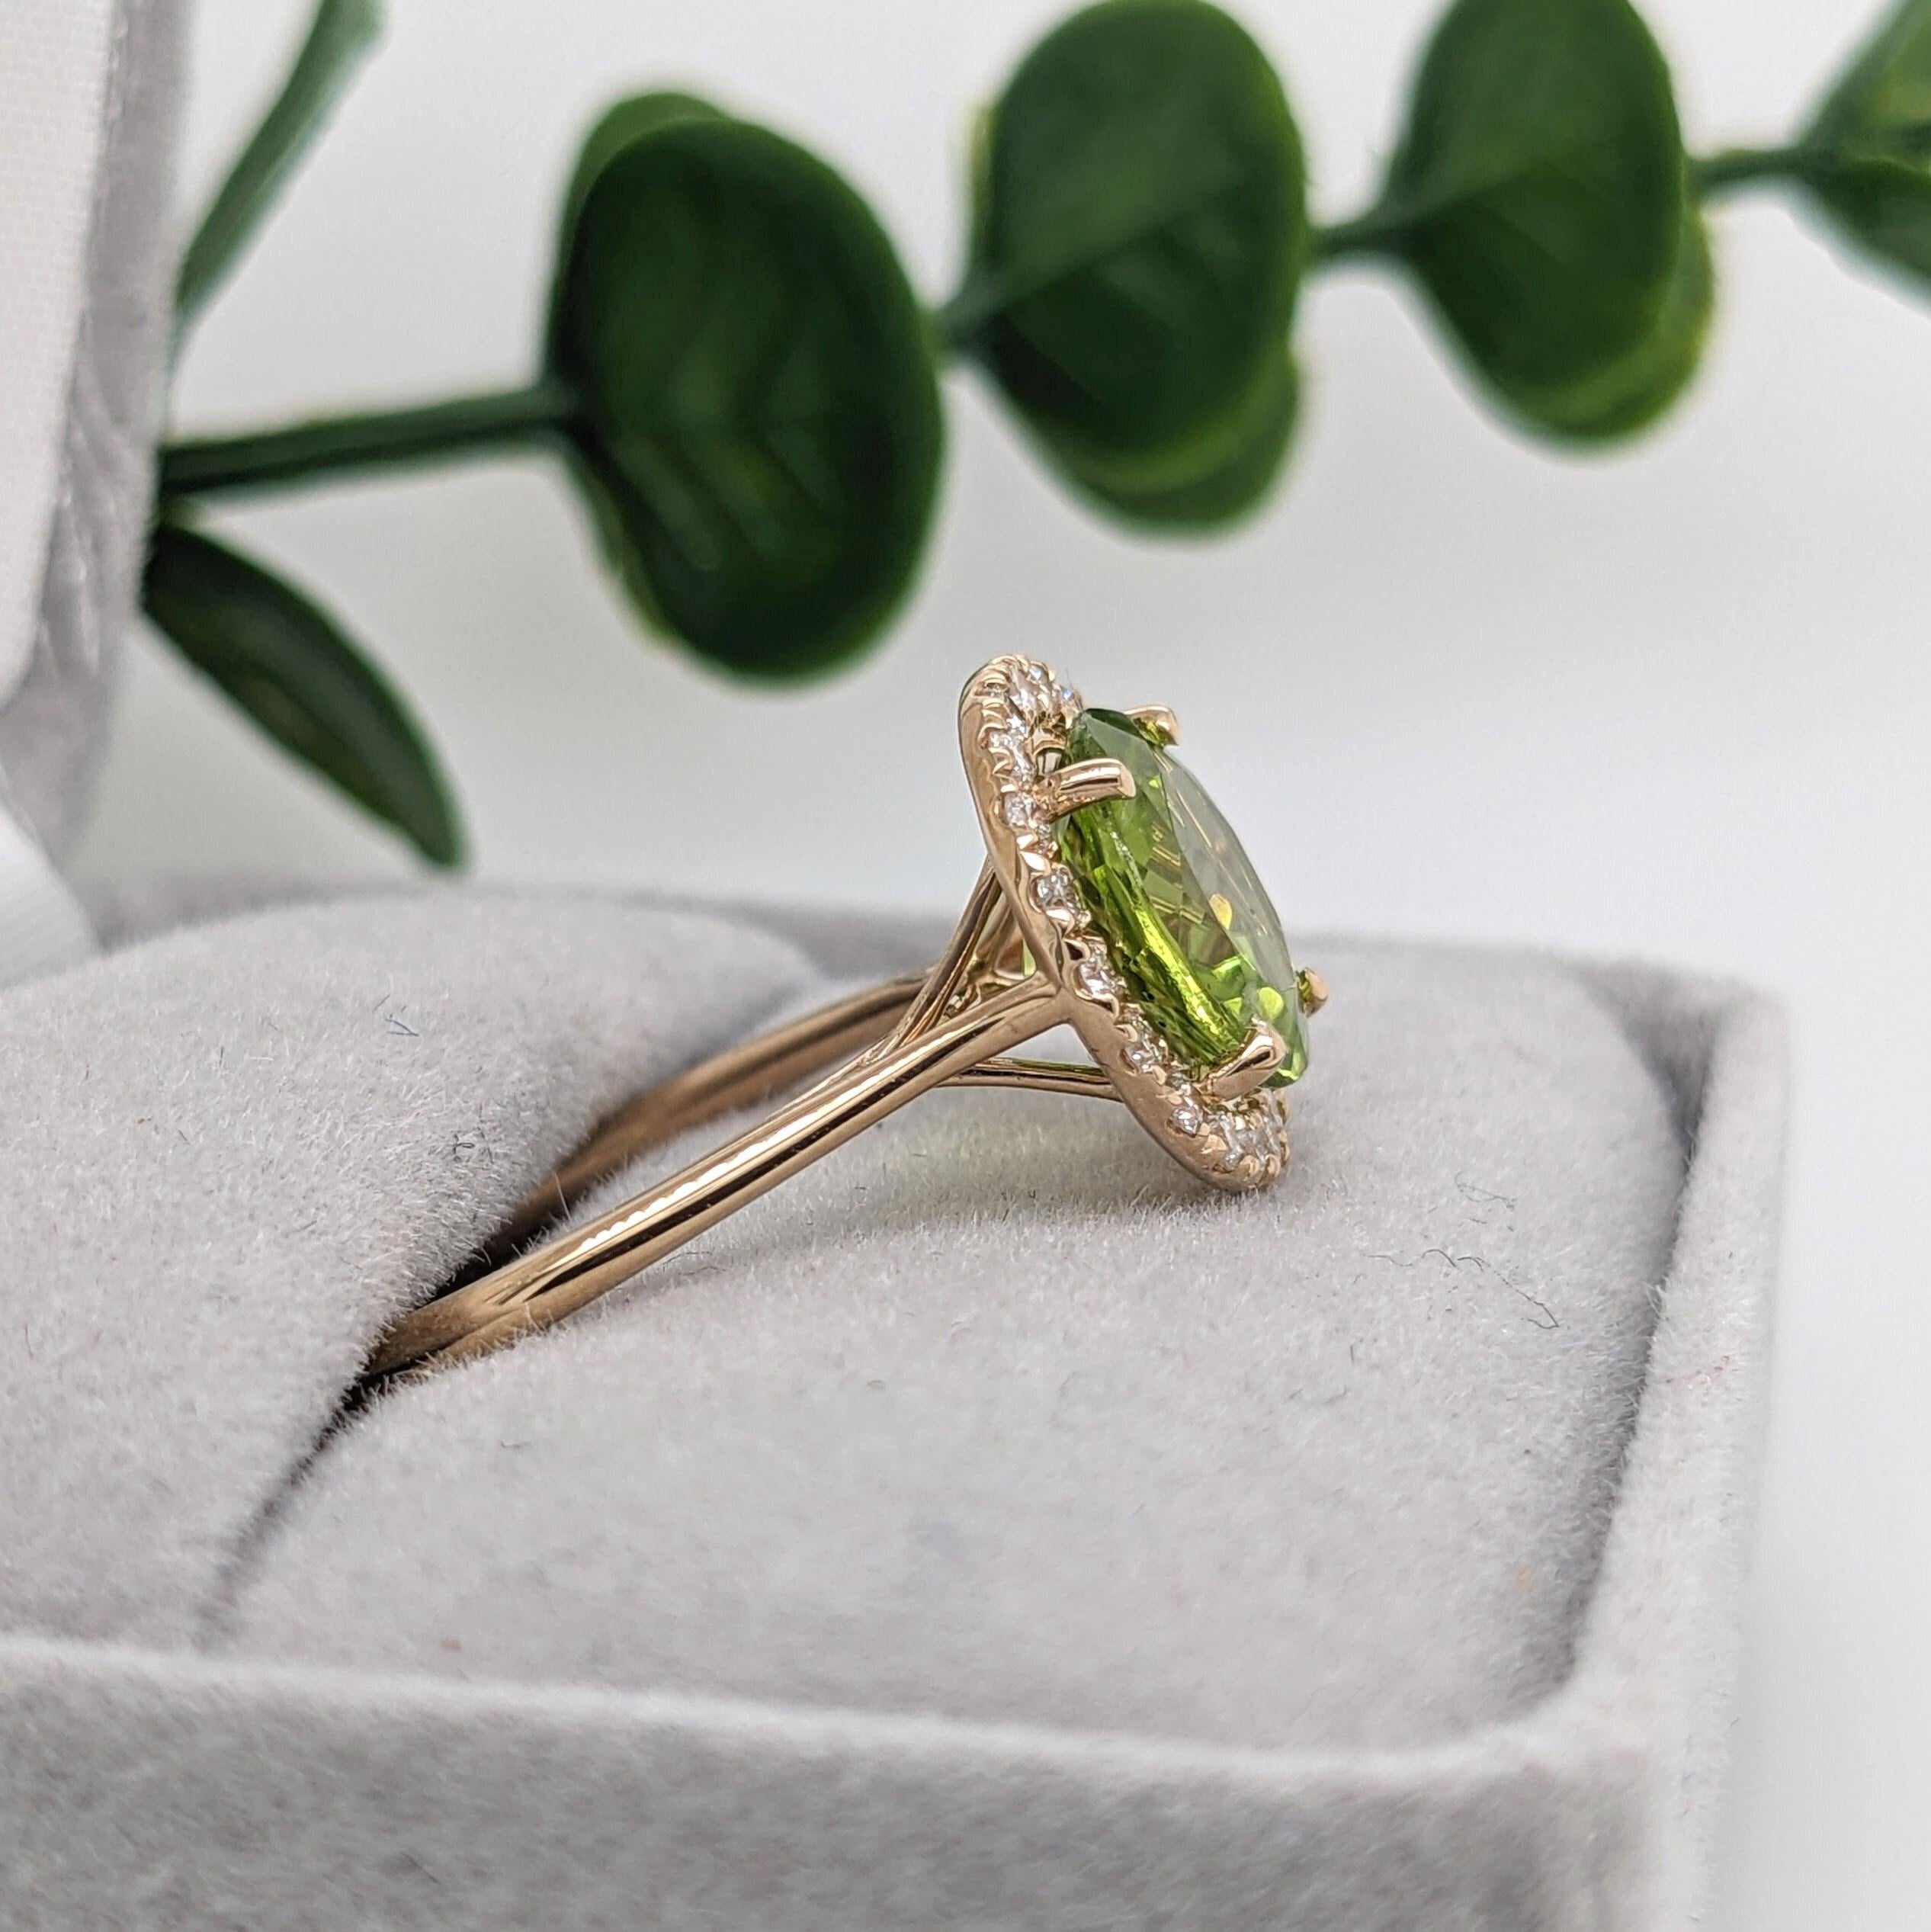 2.7ct Sparkling Peridot Ring w Natural Diamonds in Solid 14k Gold Round 9mm